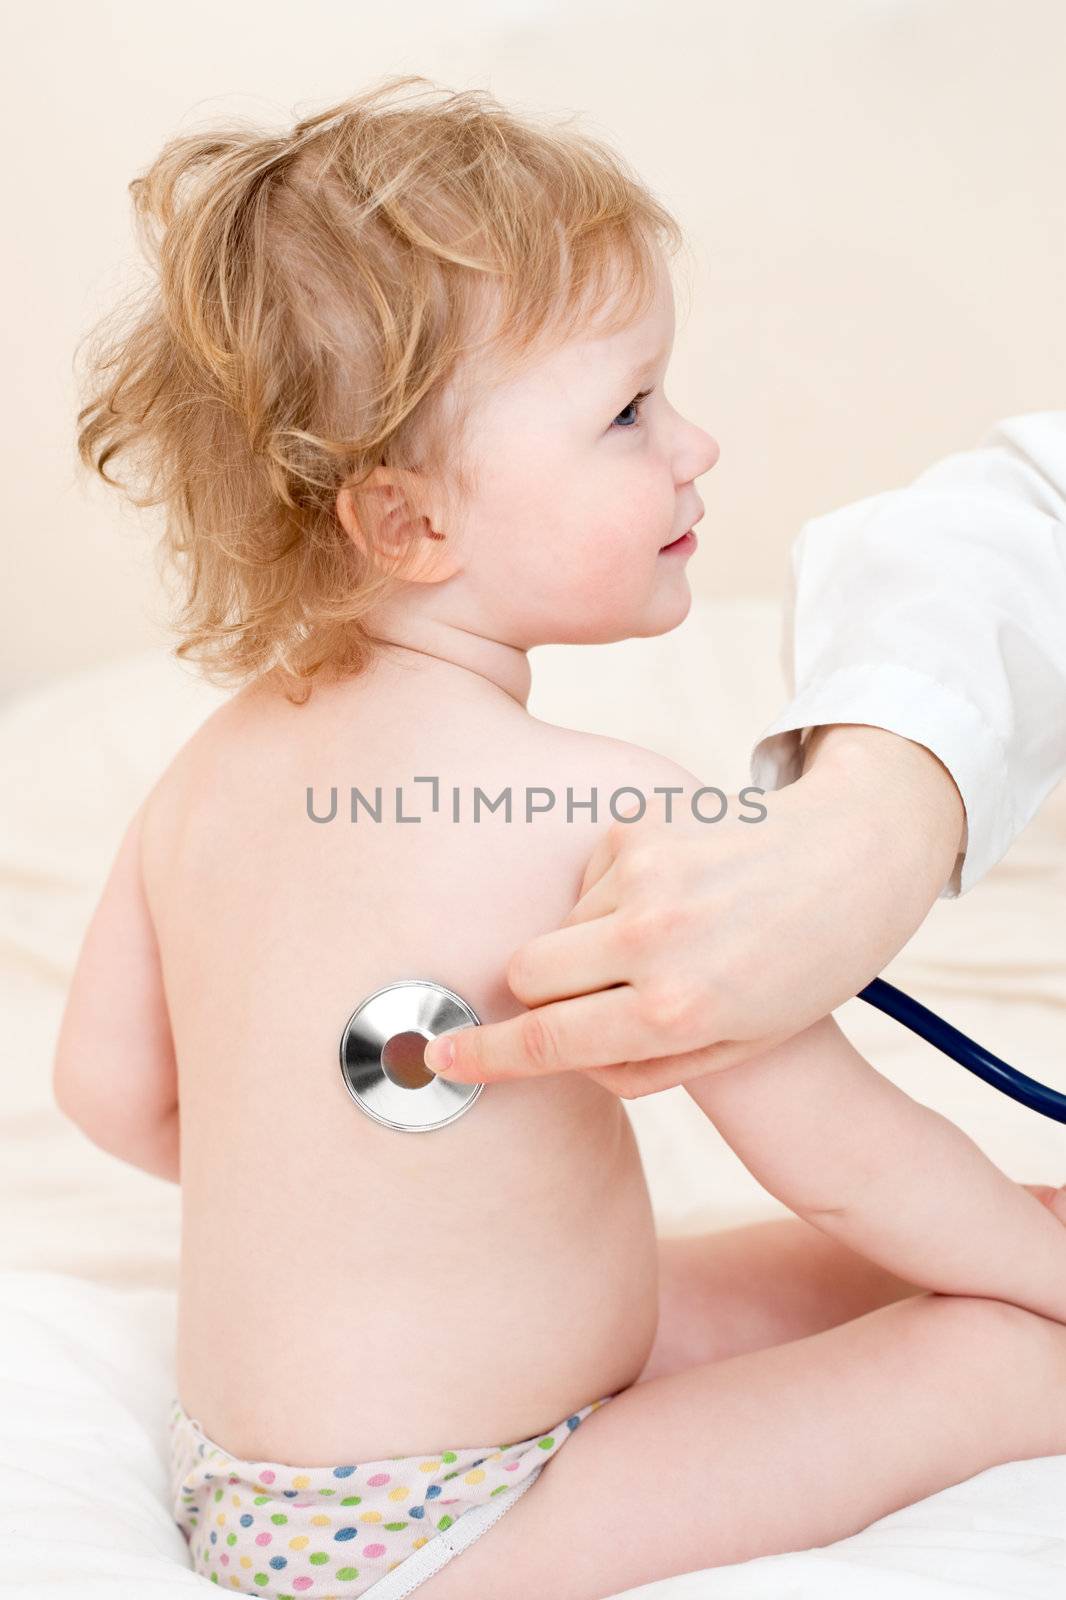 Pediatrician examining little girl with stethoscope